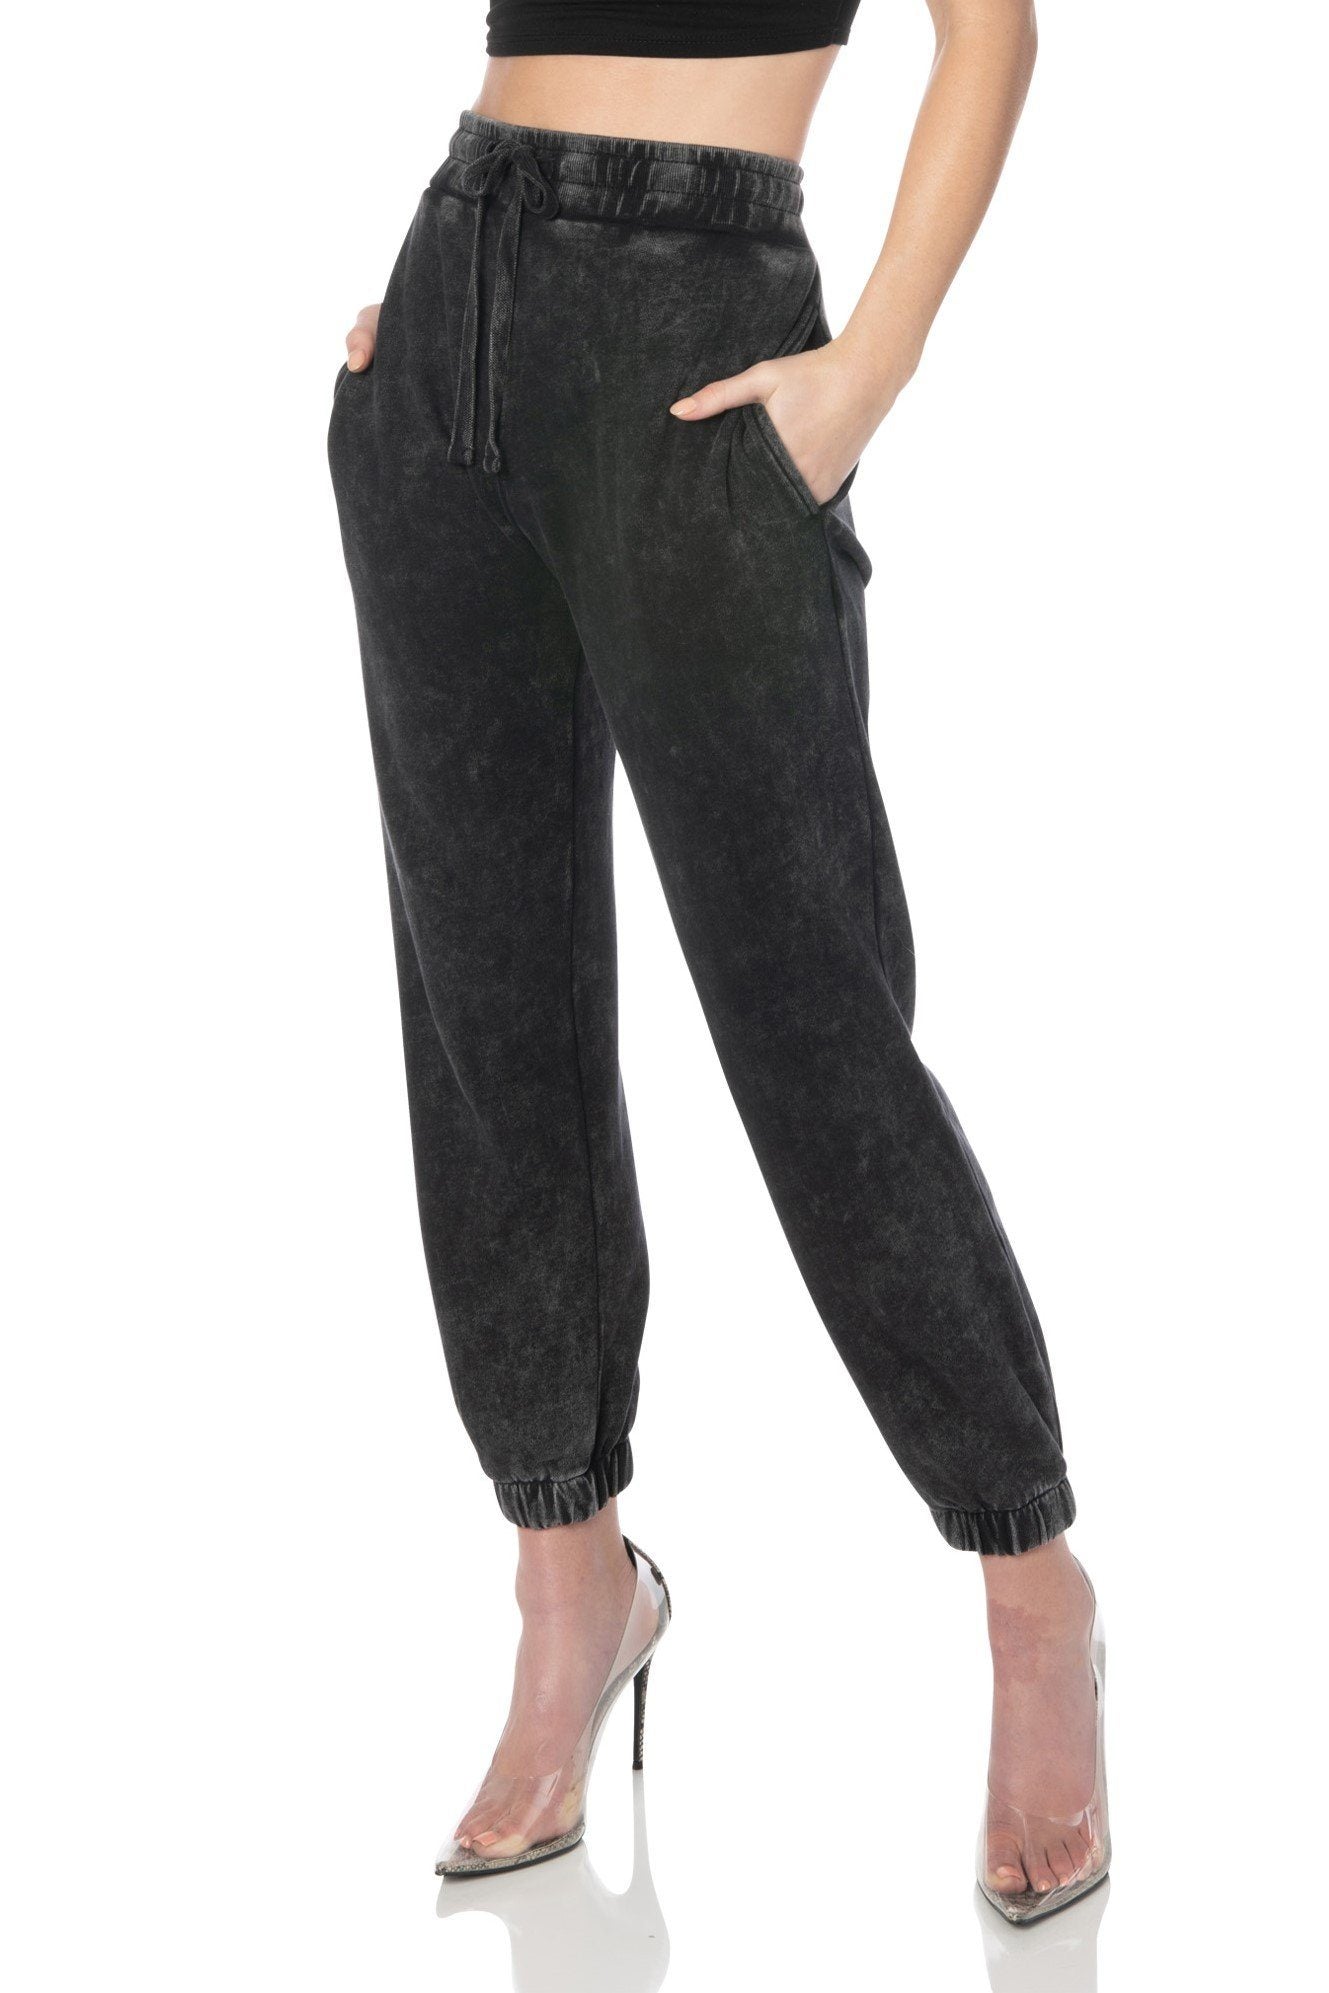 Mineral Washed Black Relaxed Fit Joggers - Hypeach Lounge Bottoms HYPEACH 